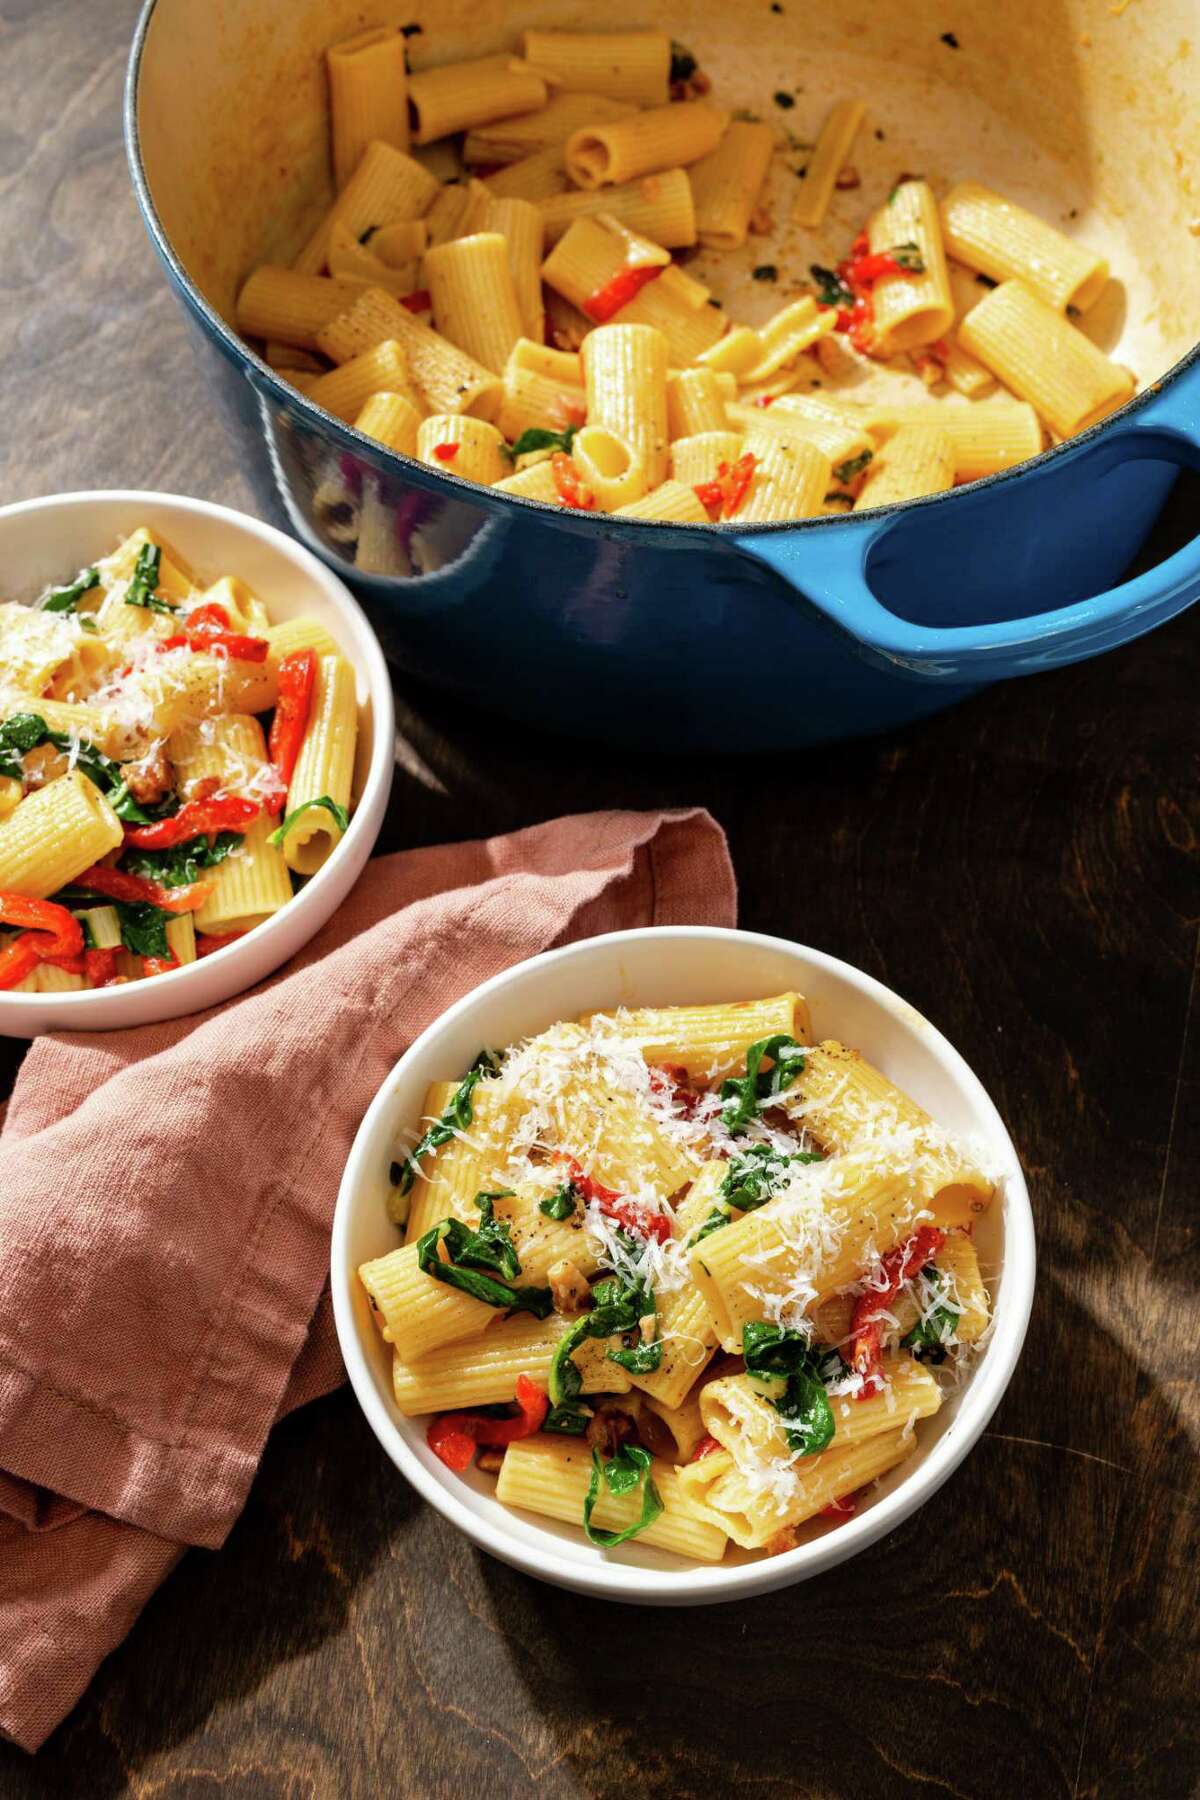 Recipe: Rigatoni with Swiss Chard, Bell Peppers and Pancetta